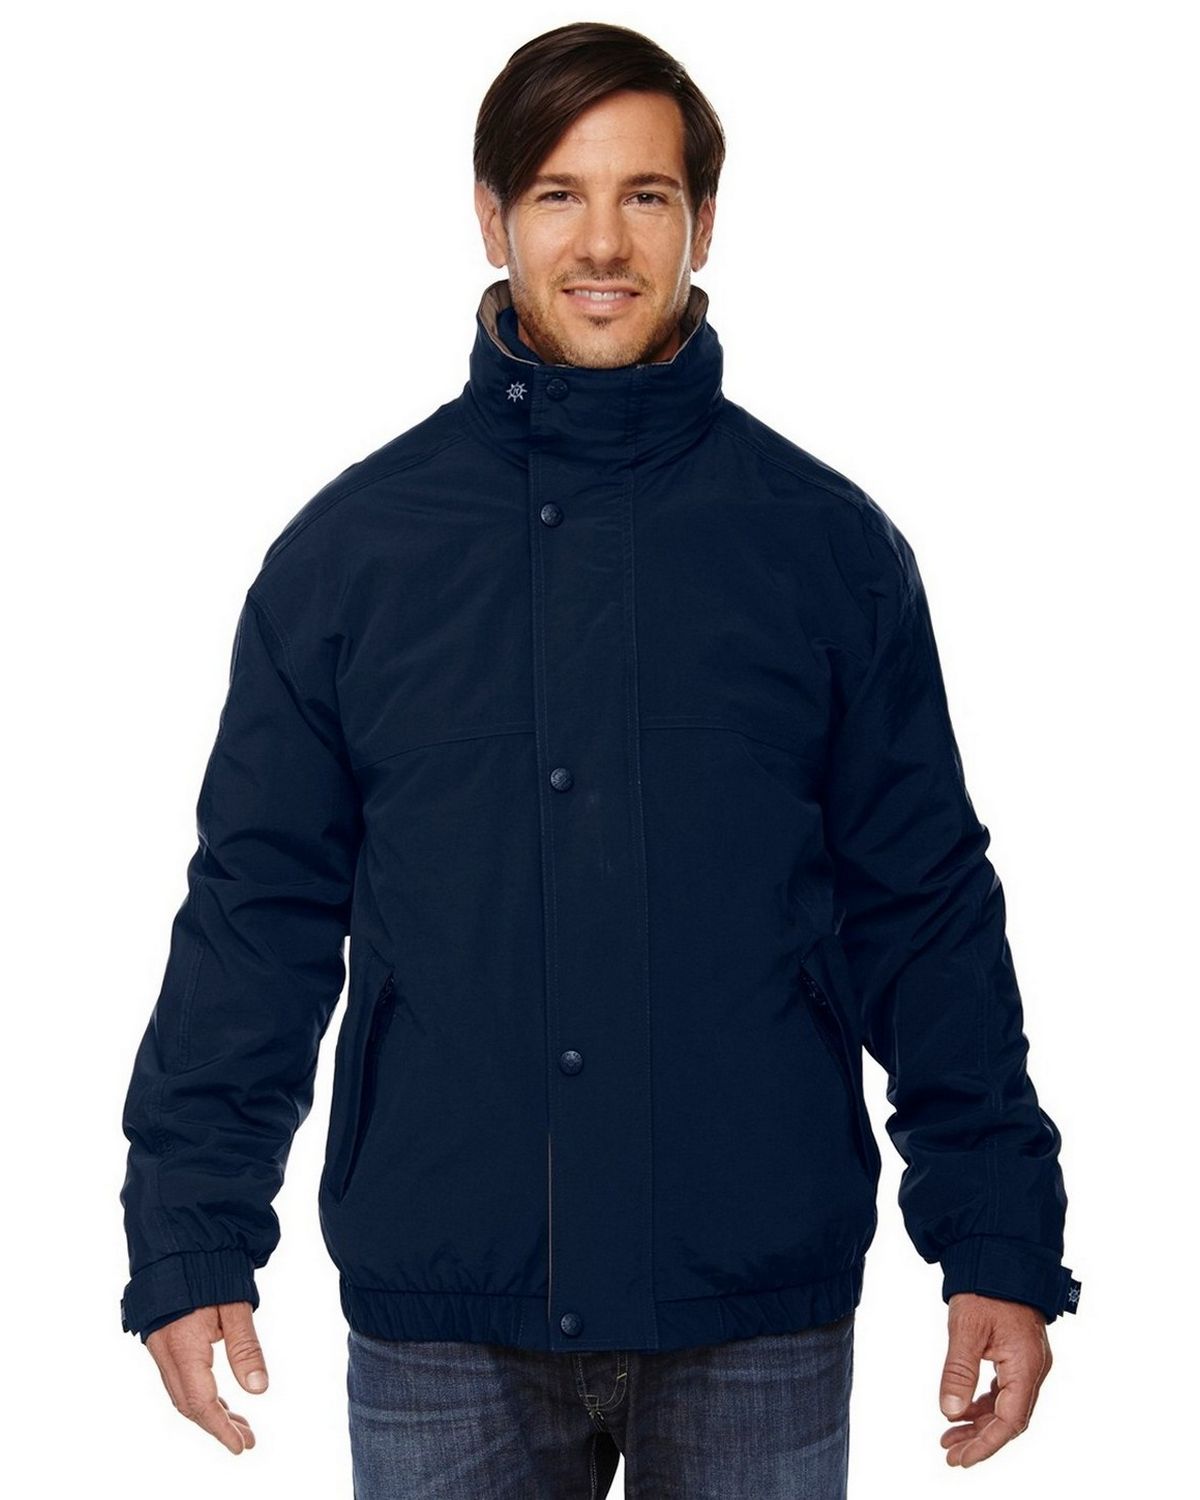 North End 88009 Mens 3-In-1 Bomber Jacket